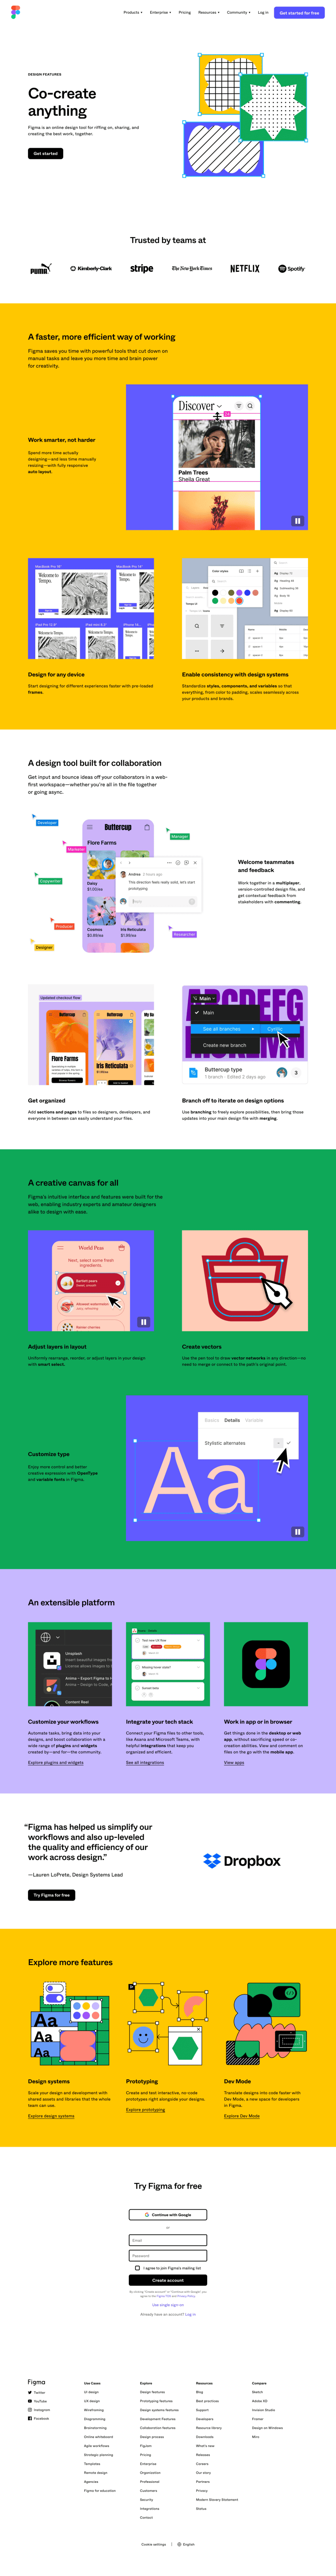 figma features page